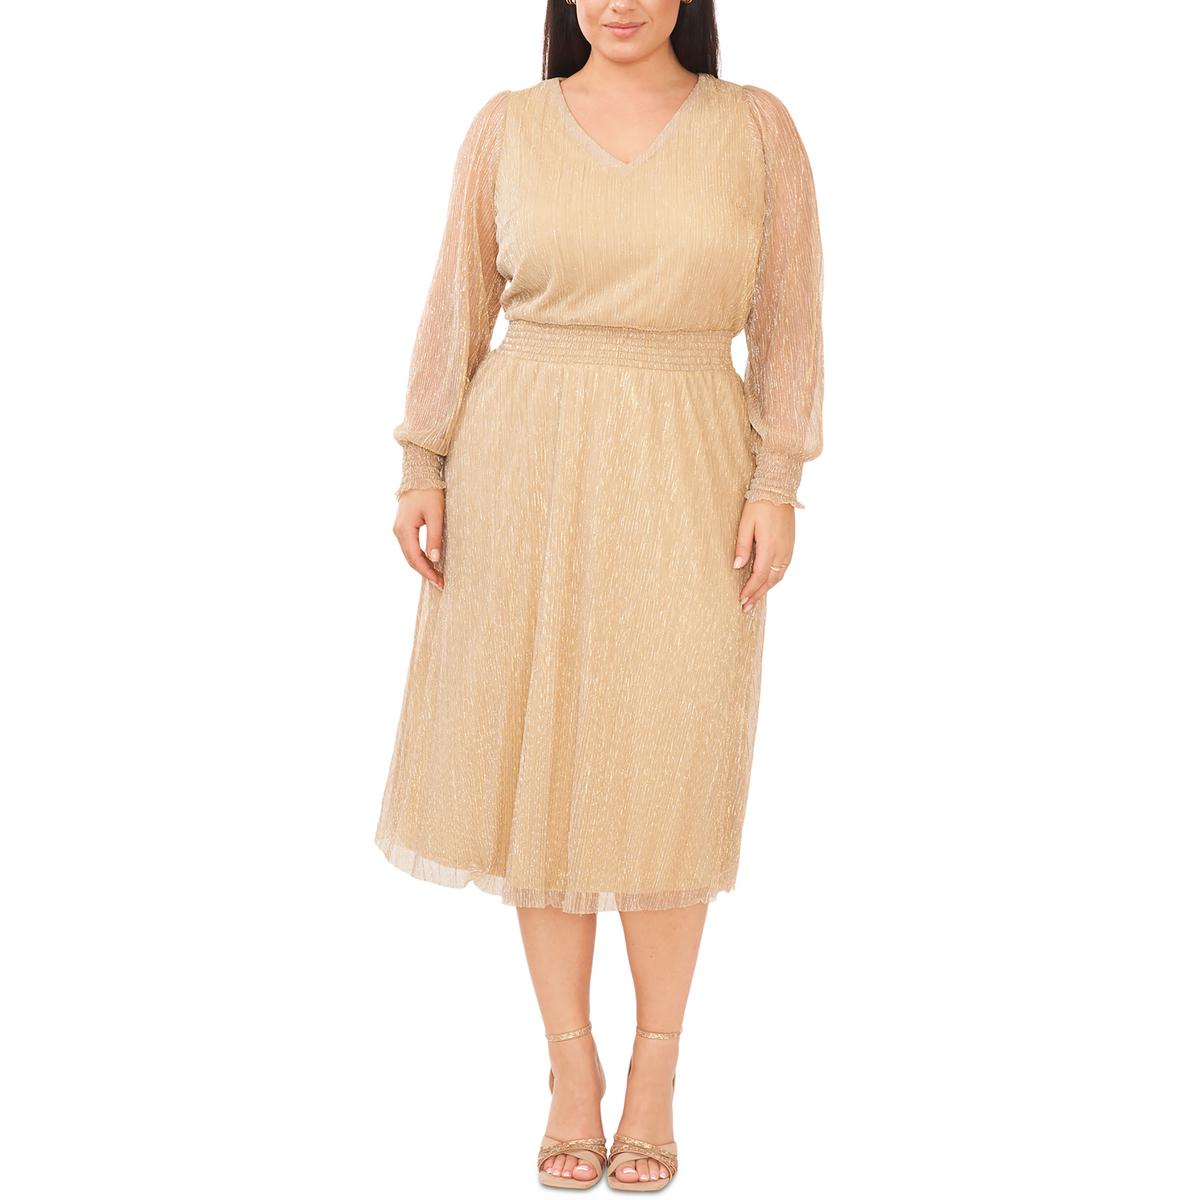 MSK Plus Womens Metallic Midi Cocktail and Party Dress